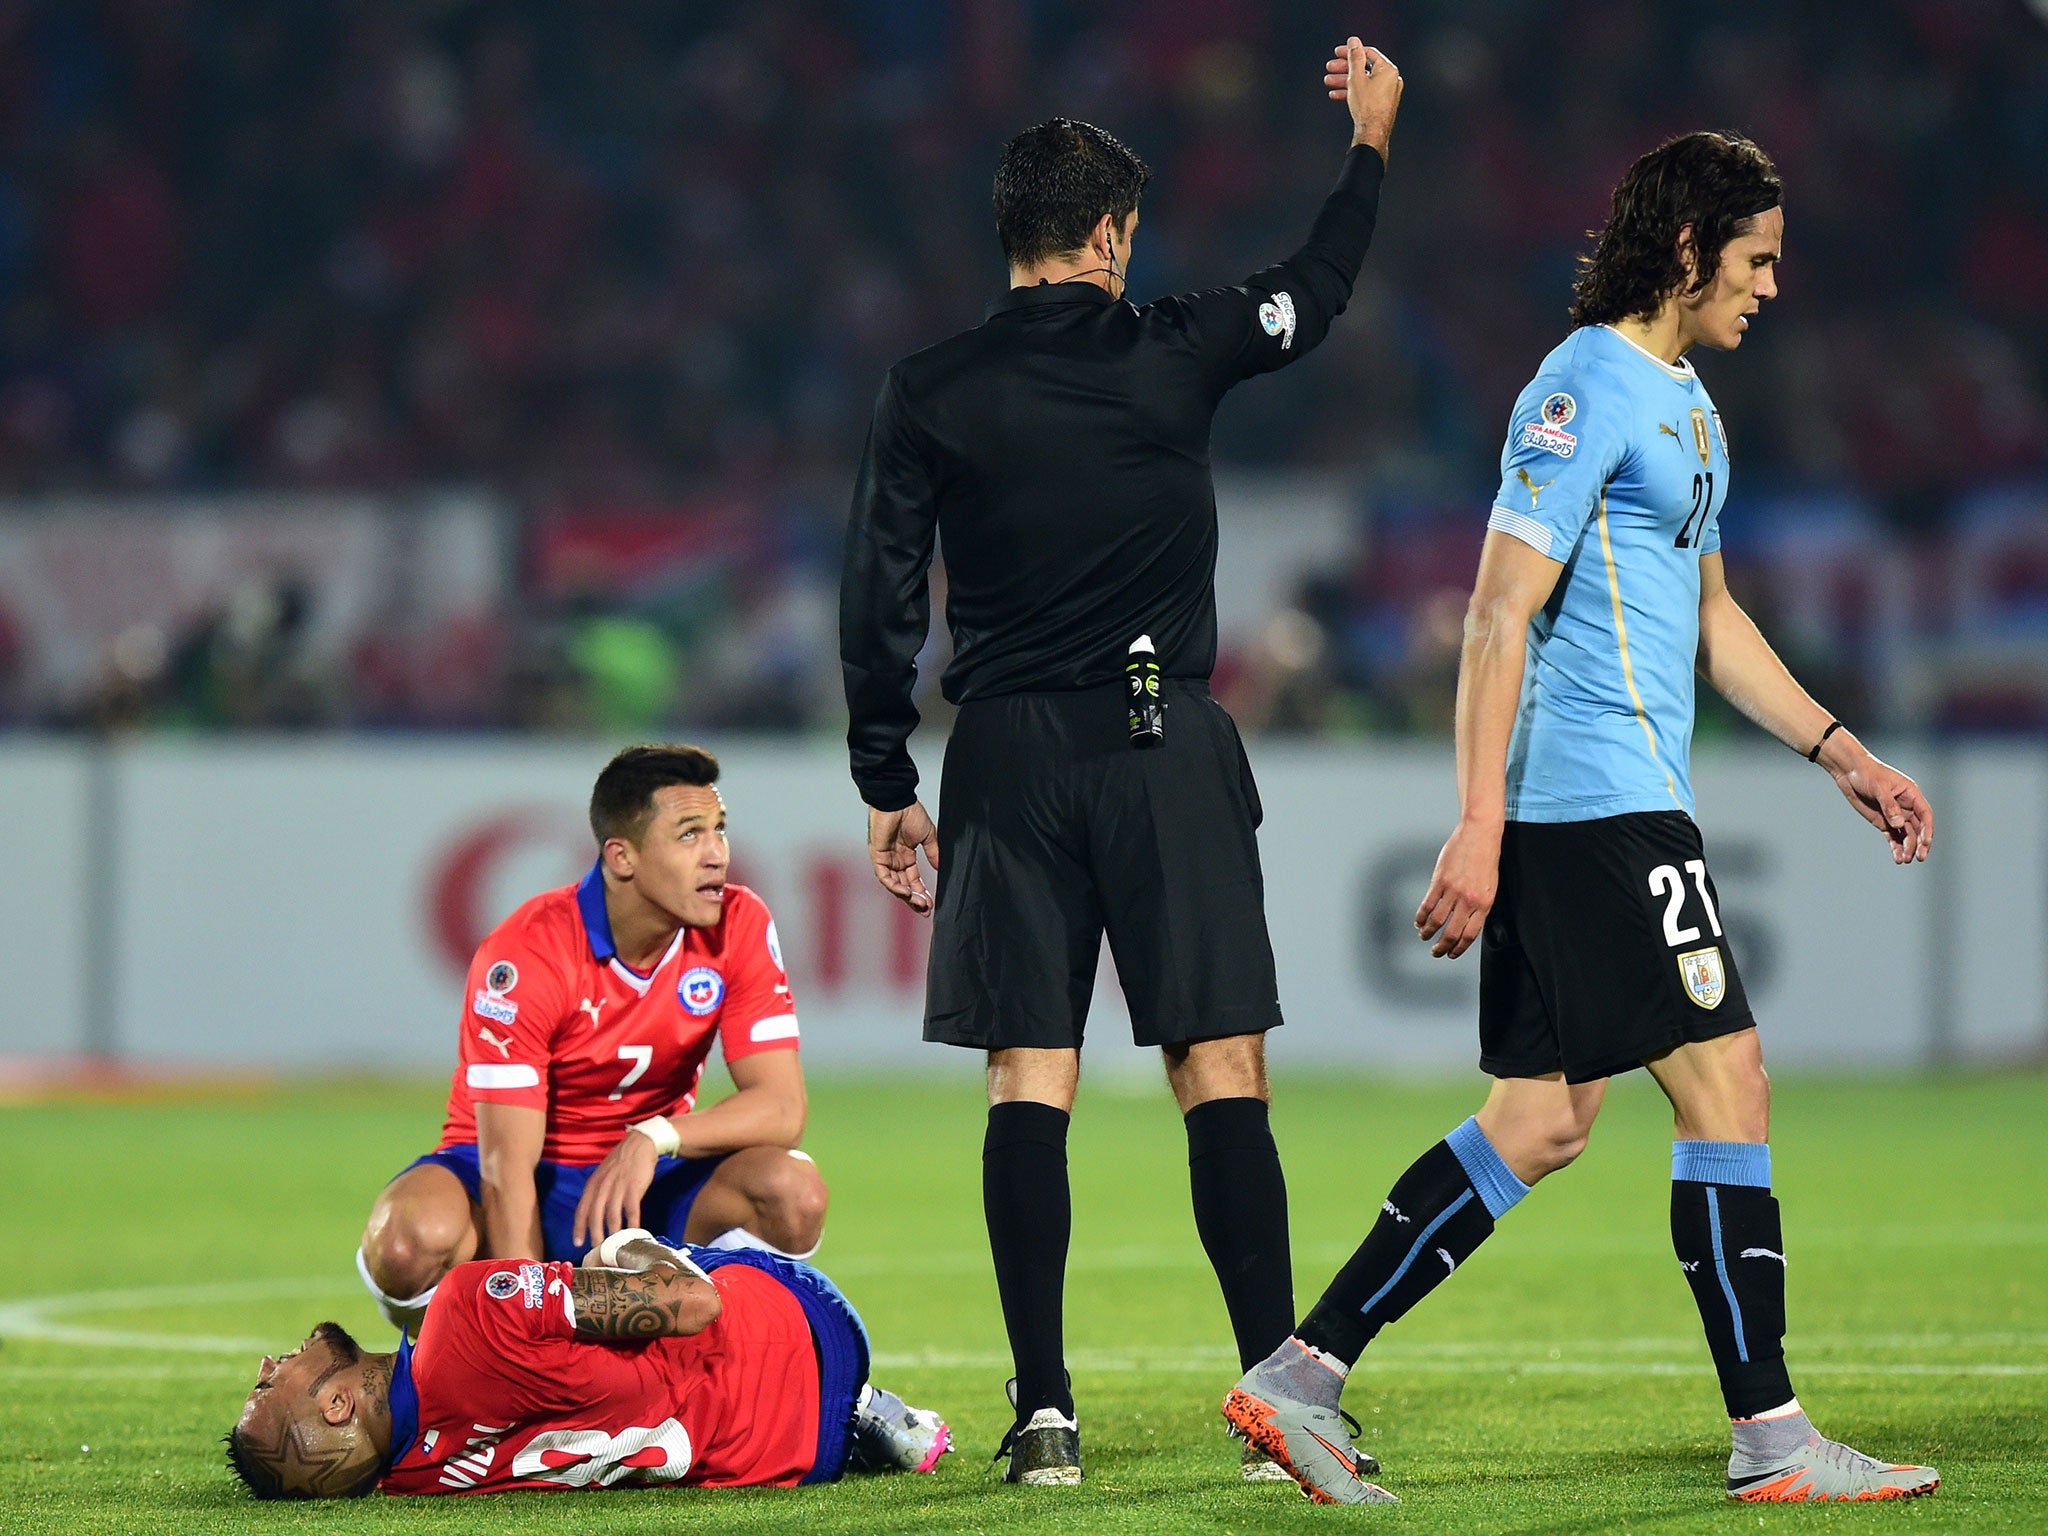 Cavani walks away after being booked for a foul on Vidal